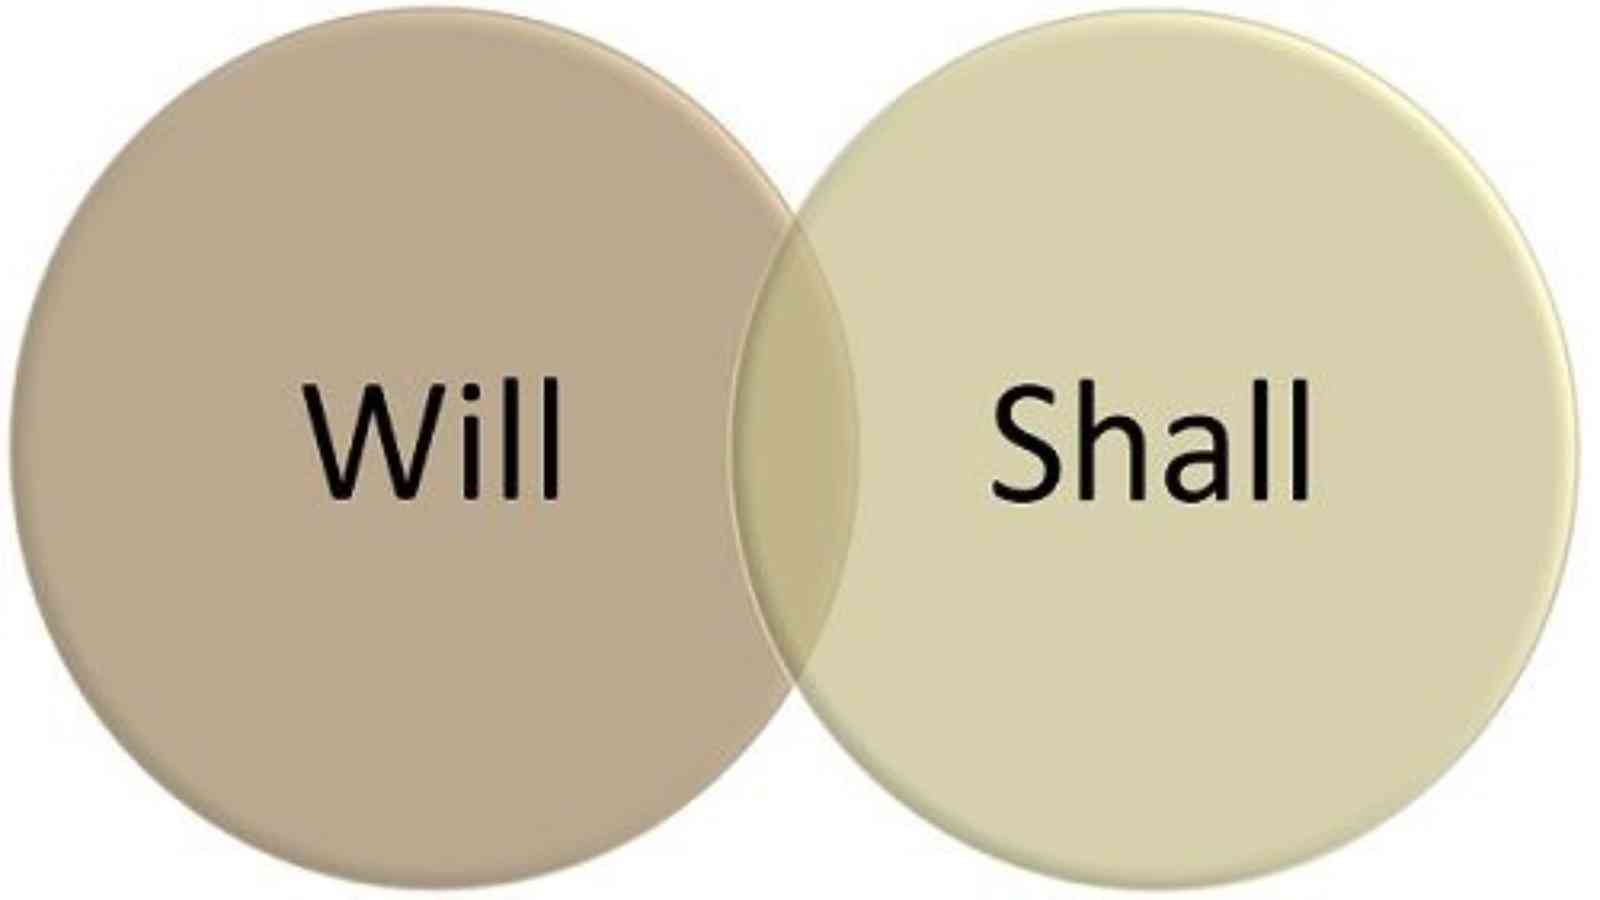 Will vs Shall: Difference between Shall and Will